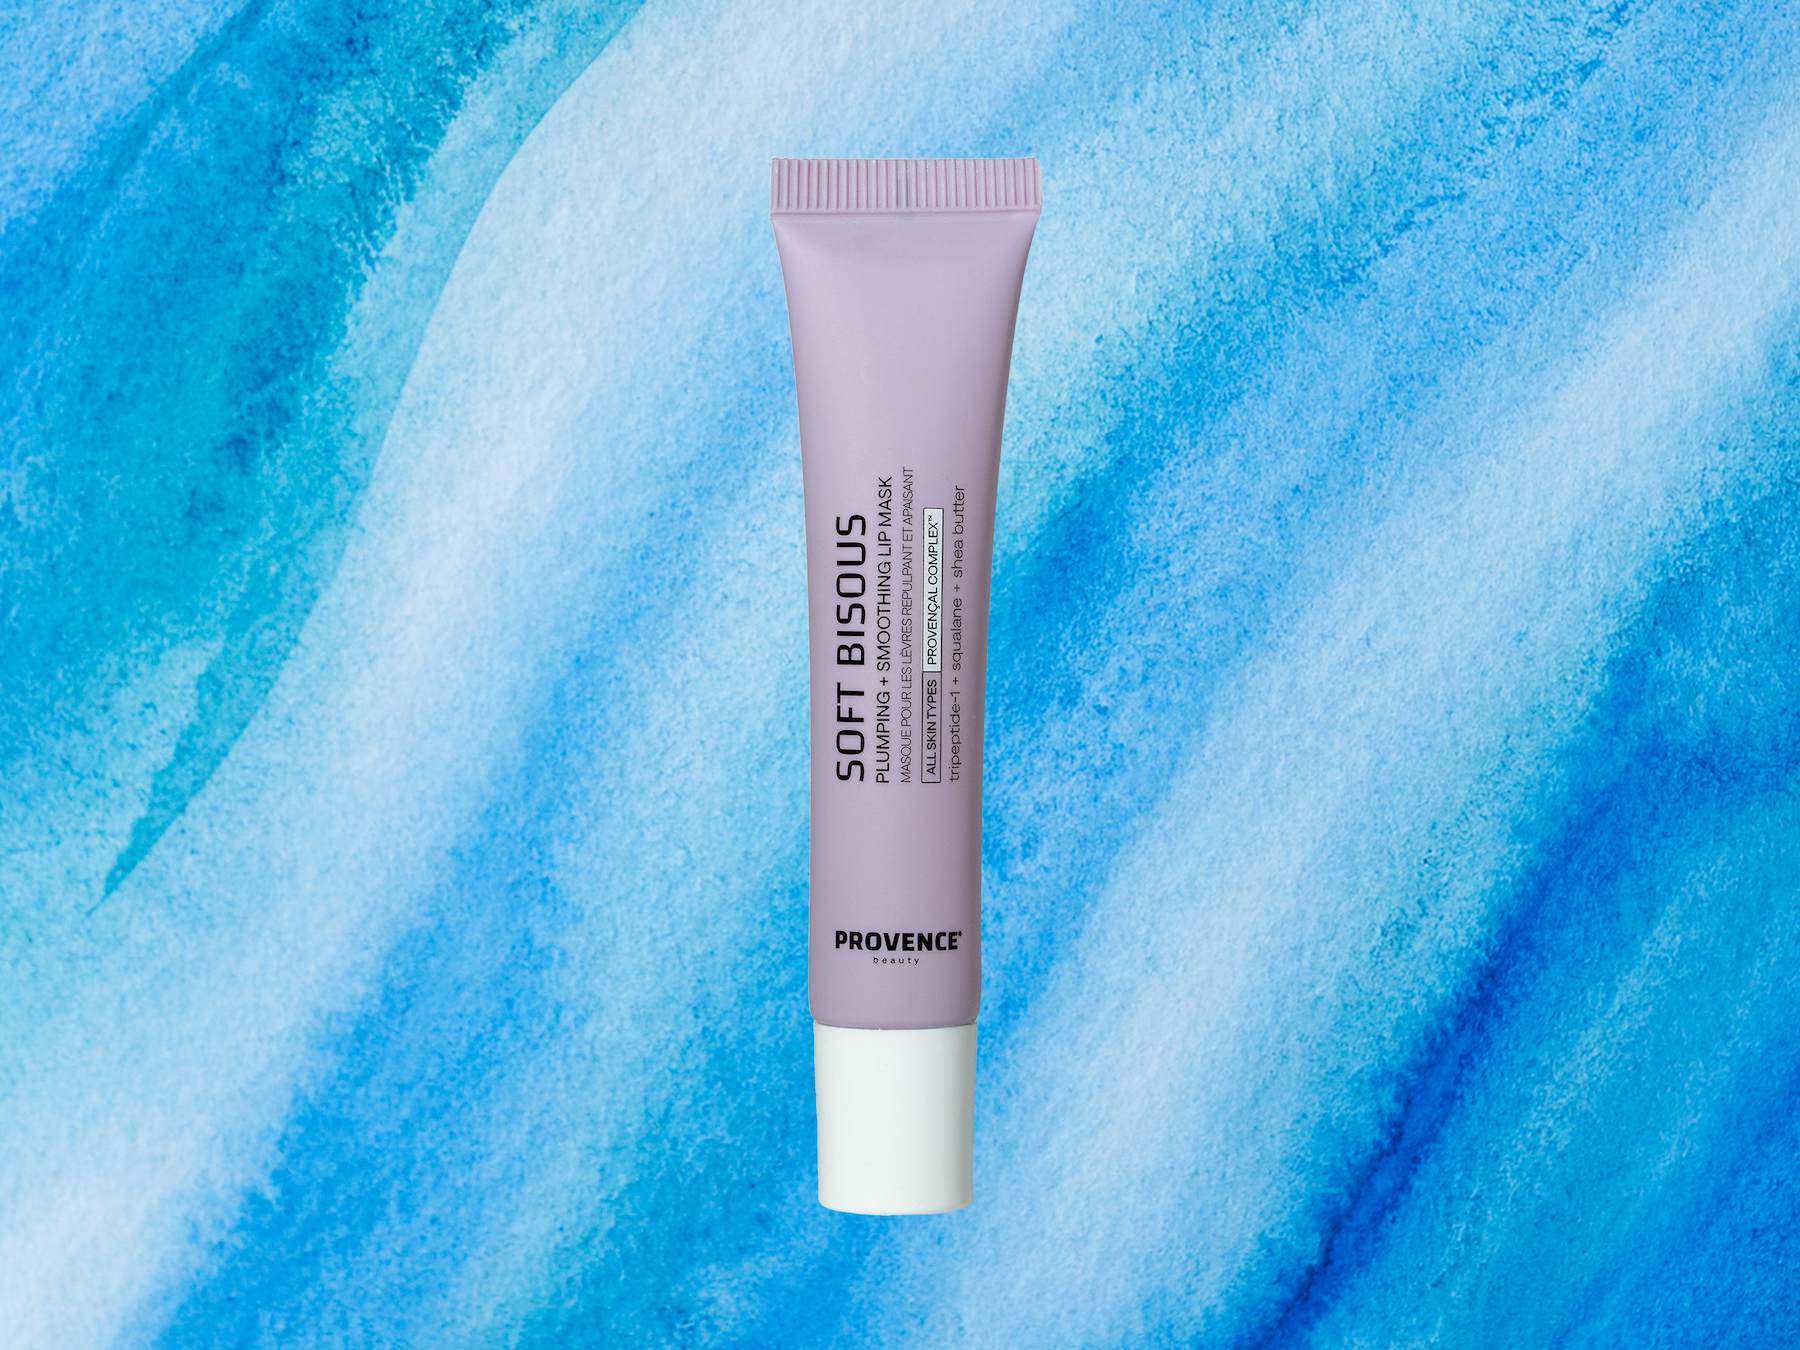 Product of the Week: PROVENCE Beauty Lip Mask